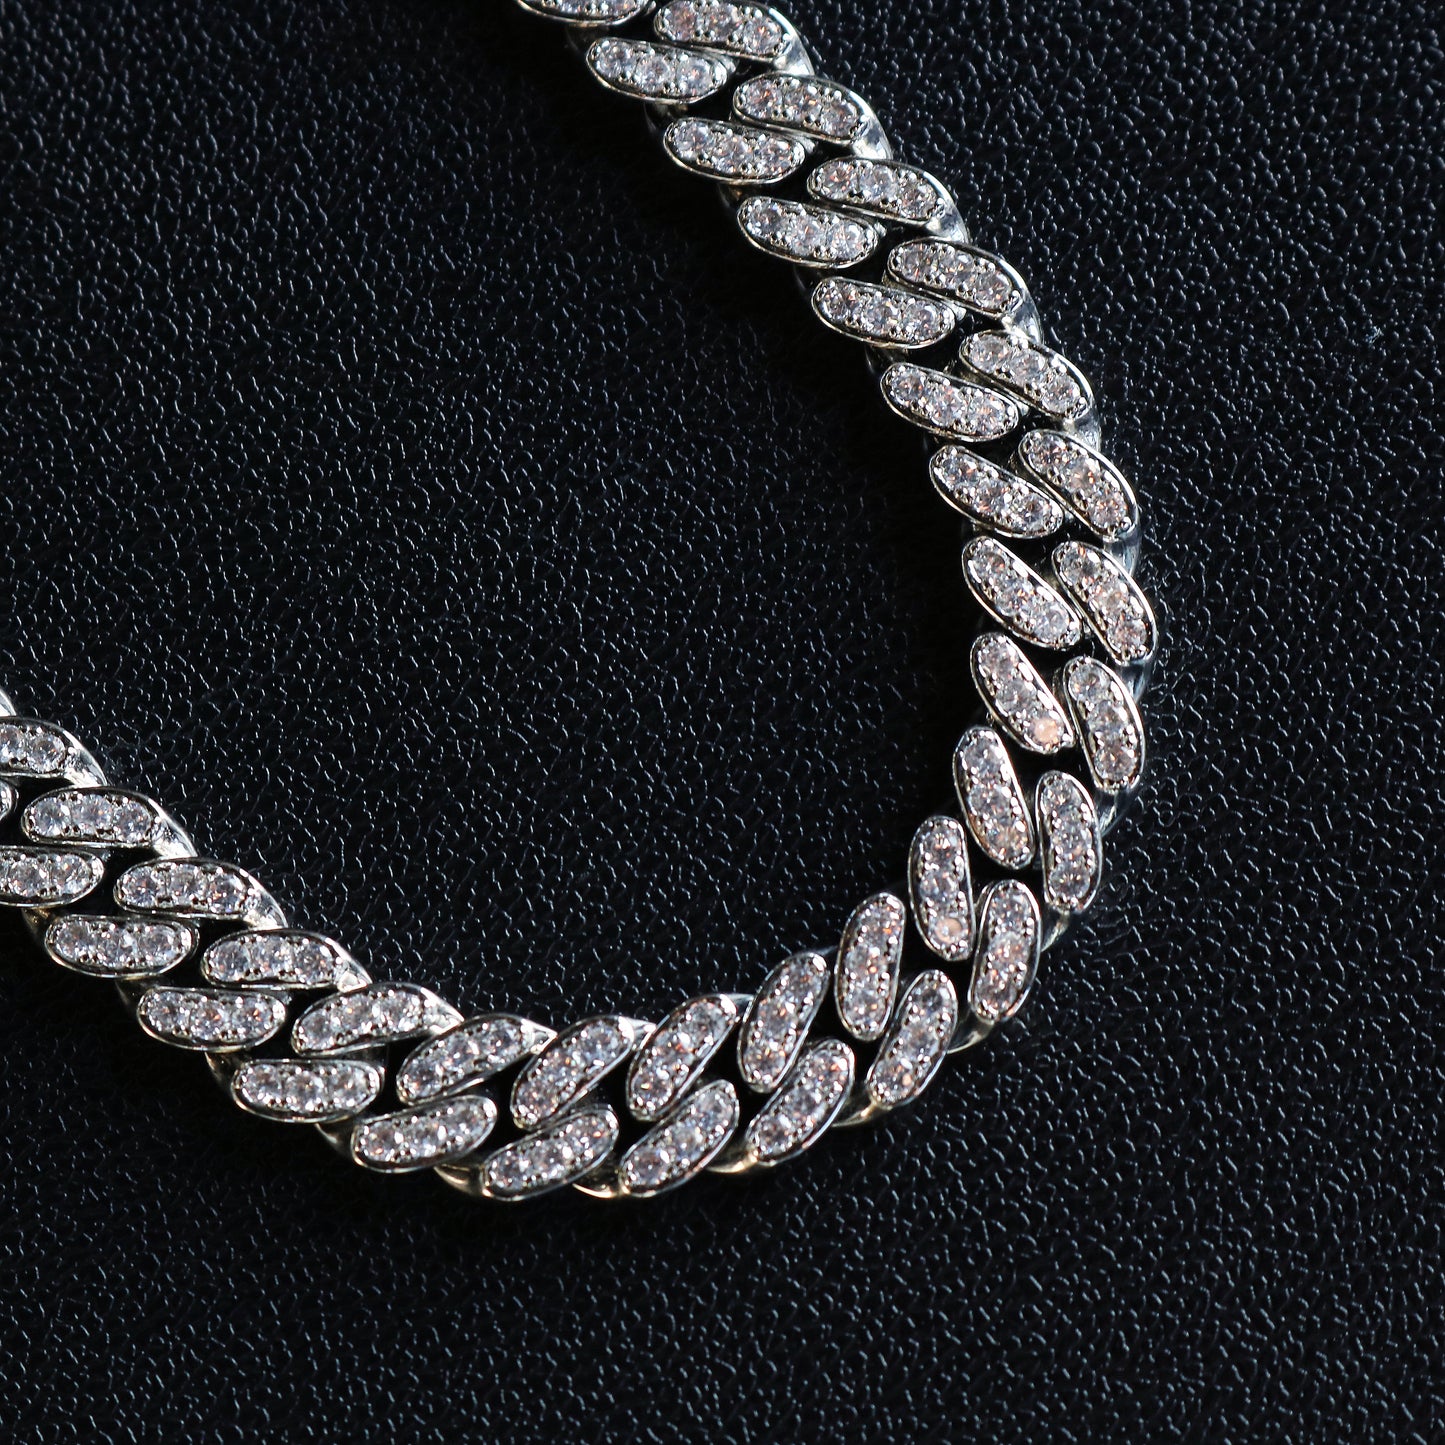 Women's 12mm Iced Out Miami Cuban Chain - White Gold